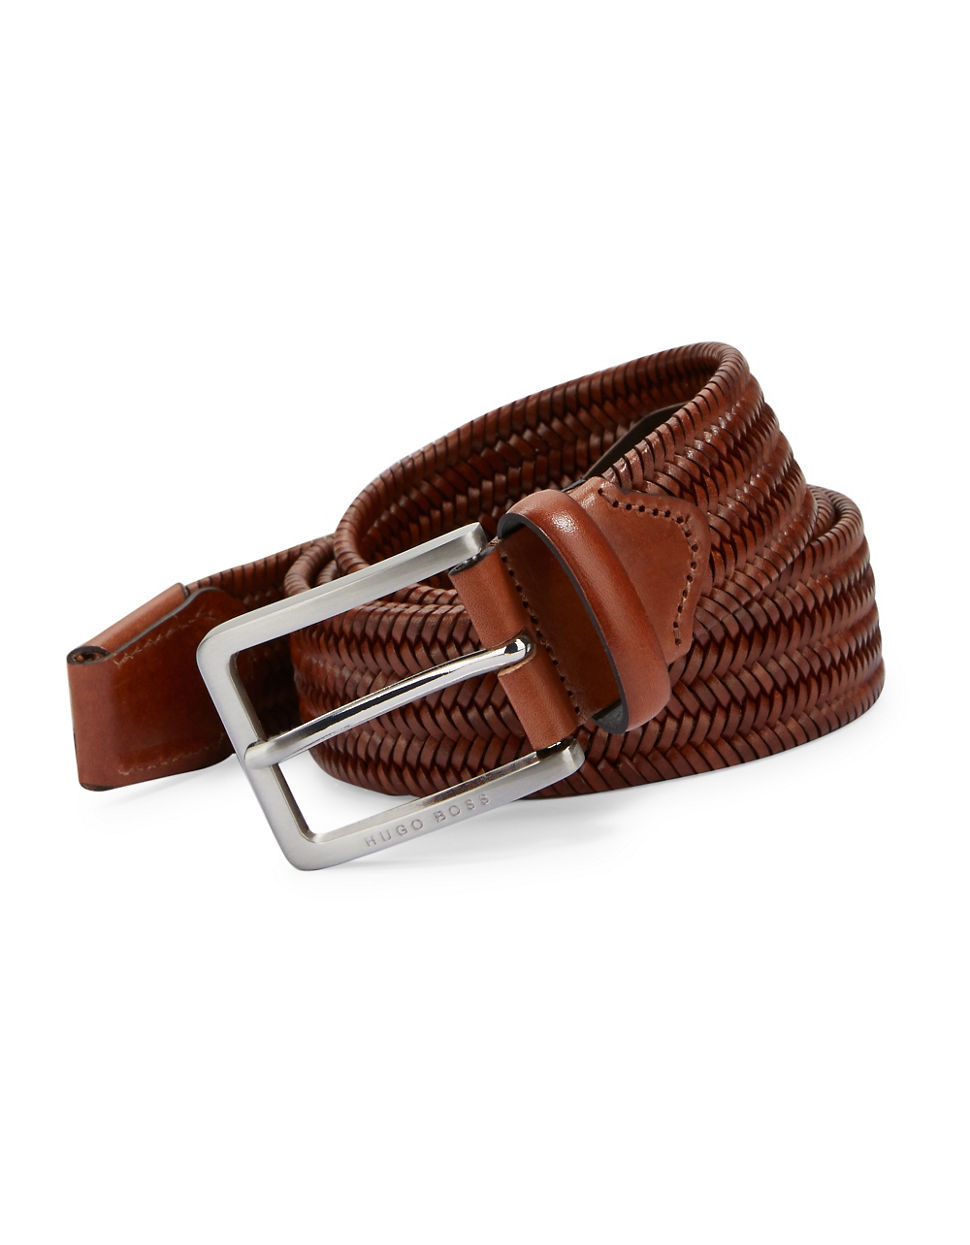 Lyst - Boss Braided Leather Belt in Brown for Men